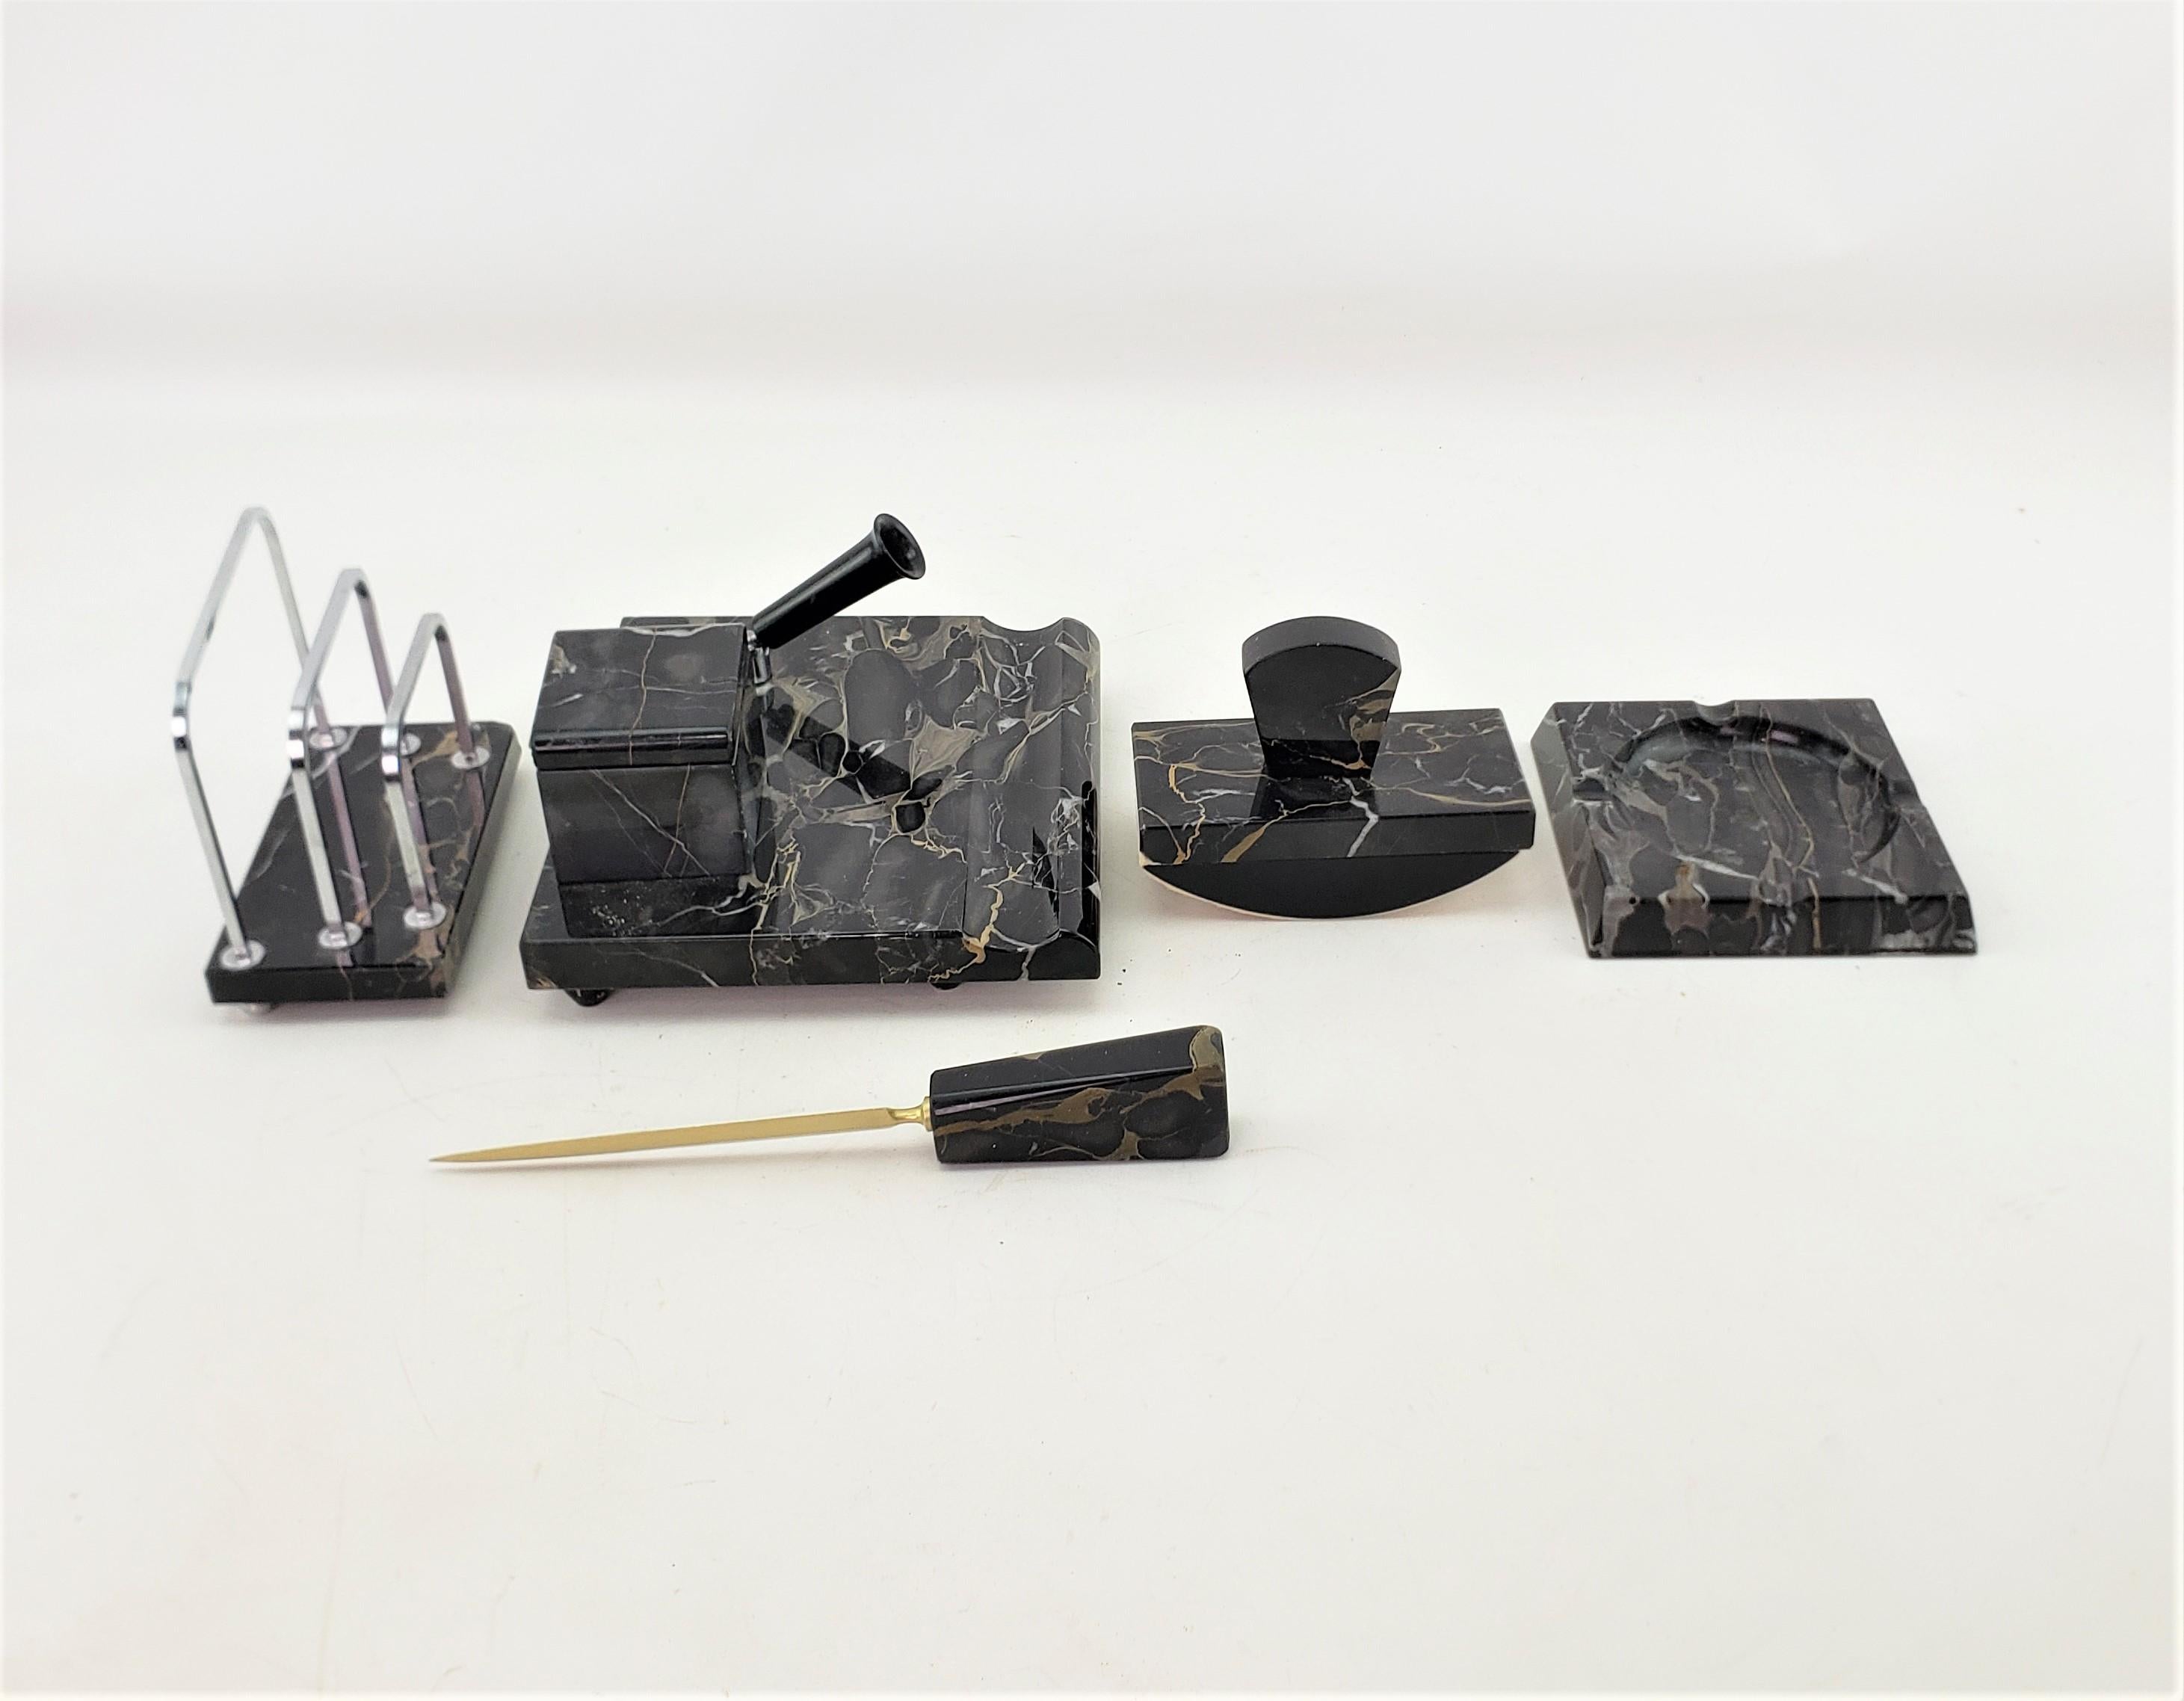 Antique Art Deco Black Marble Five Piece Desk Set with Chrome & Brass Accents In Good Condition For Sale In Hamilton, Ontario